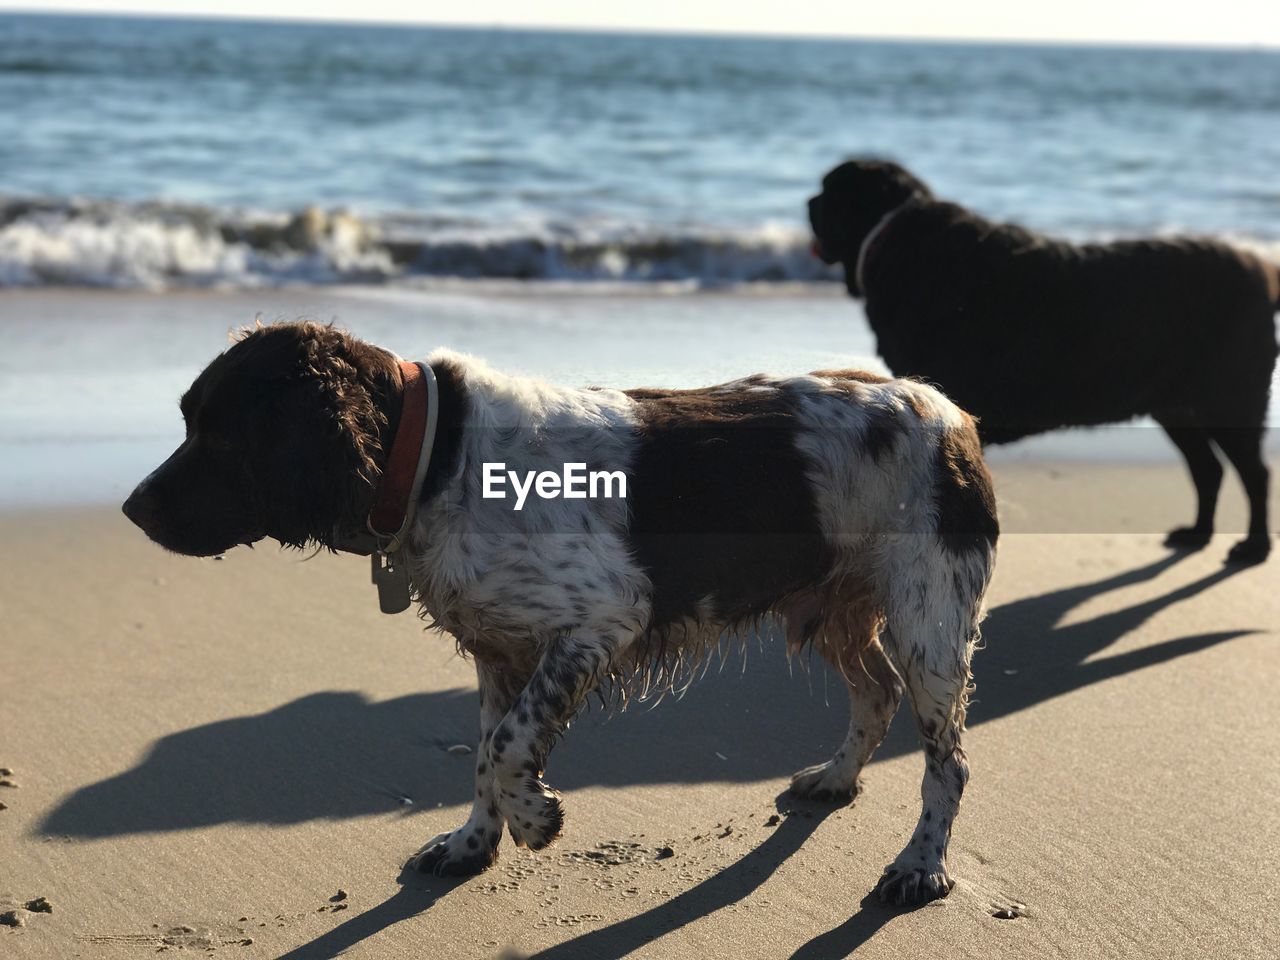 Dogs standing on shore at beach